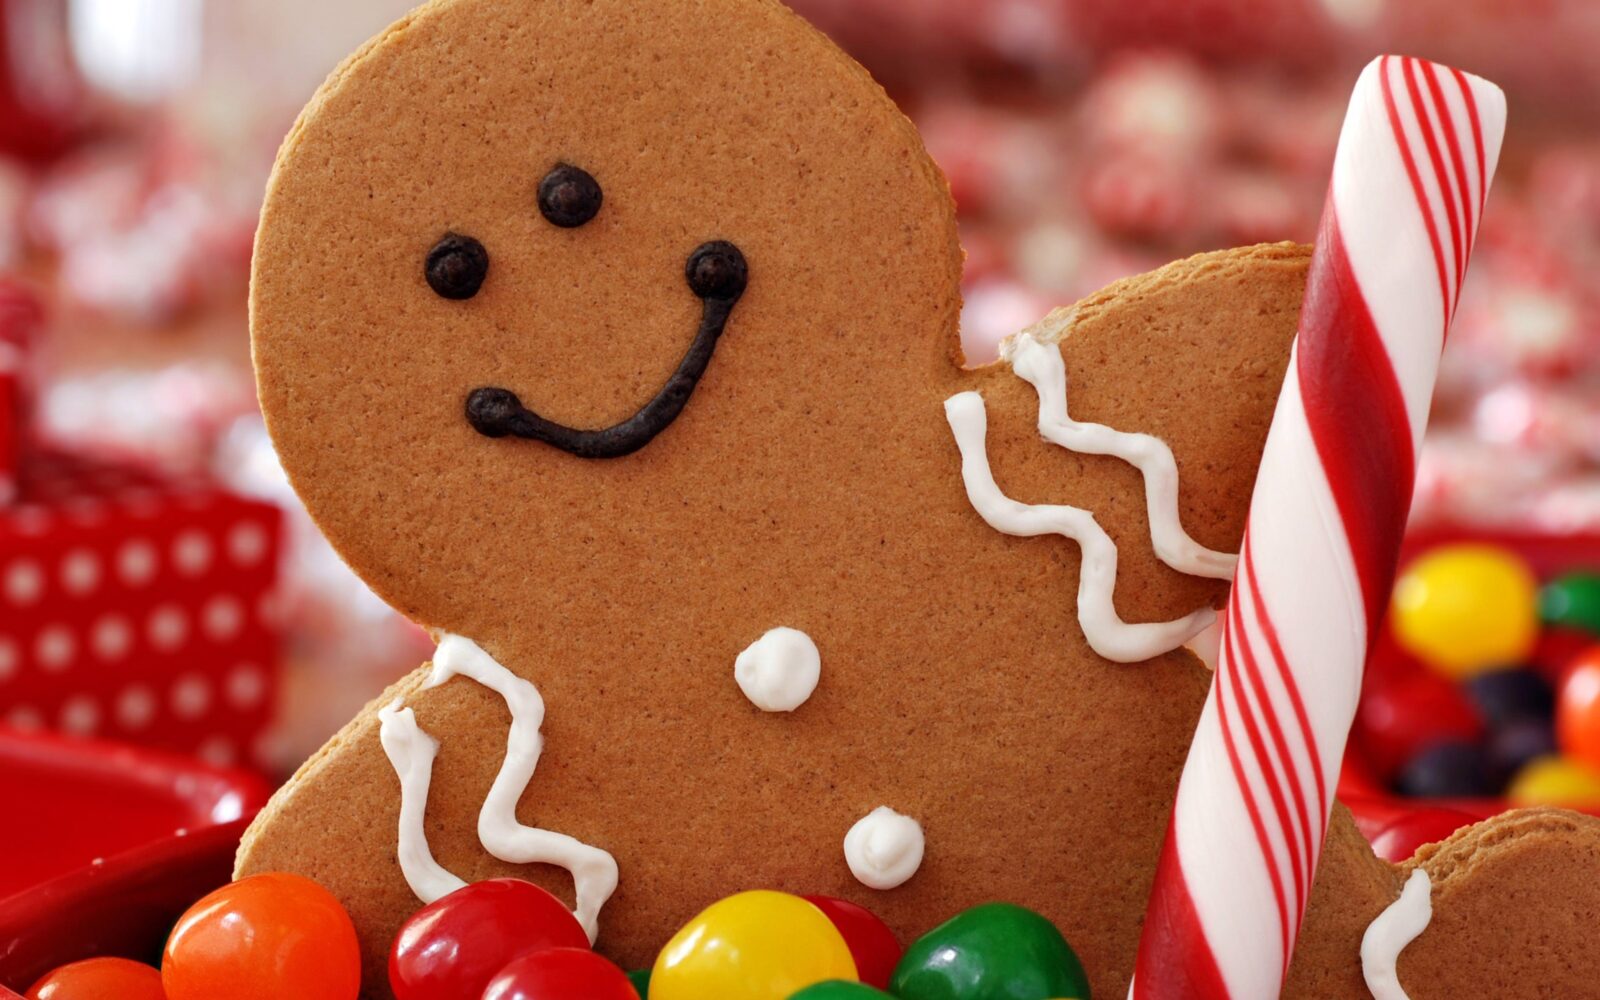 Holiday sweets can be tough on teeth Art of Smiles